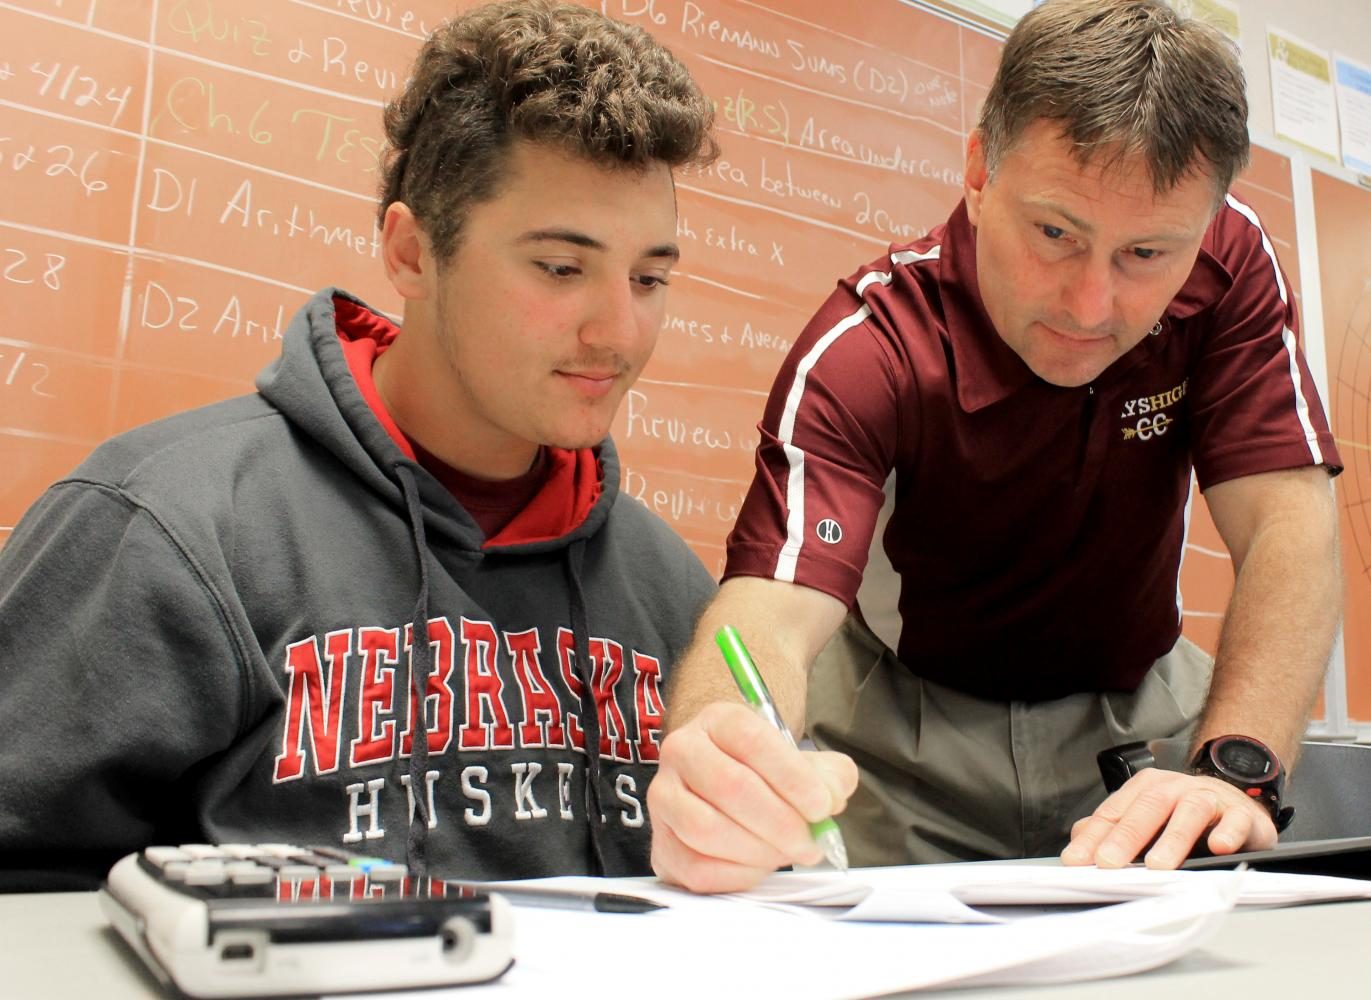 Before Calculus Methods, instructor Jerold Harris spends some extra time tutoring senior Tyrone Wynn on April 24. “The best part of my job is the moment when students finally understand a concept they have been struggling with,” Harris said. “I feel like I am actually making a difference and that is why I continue to do this.”